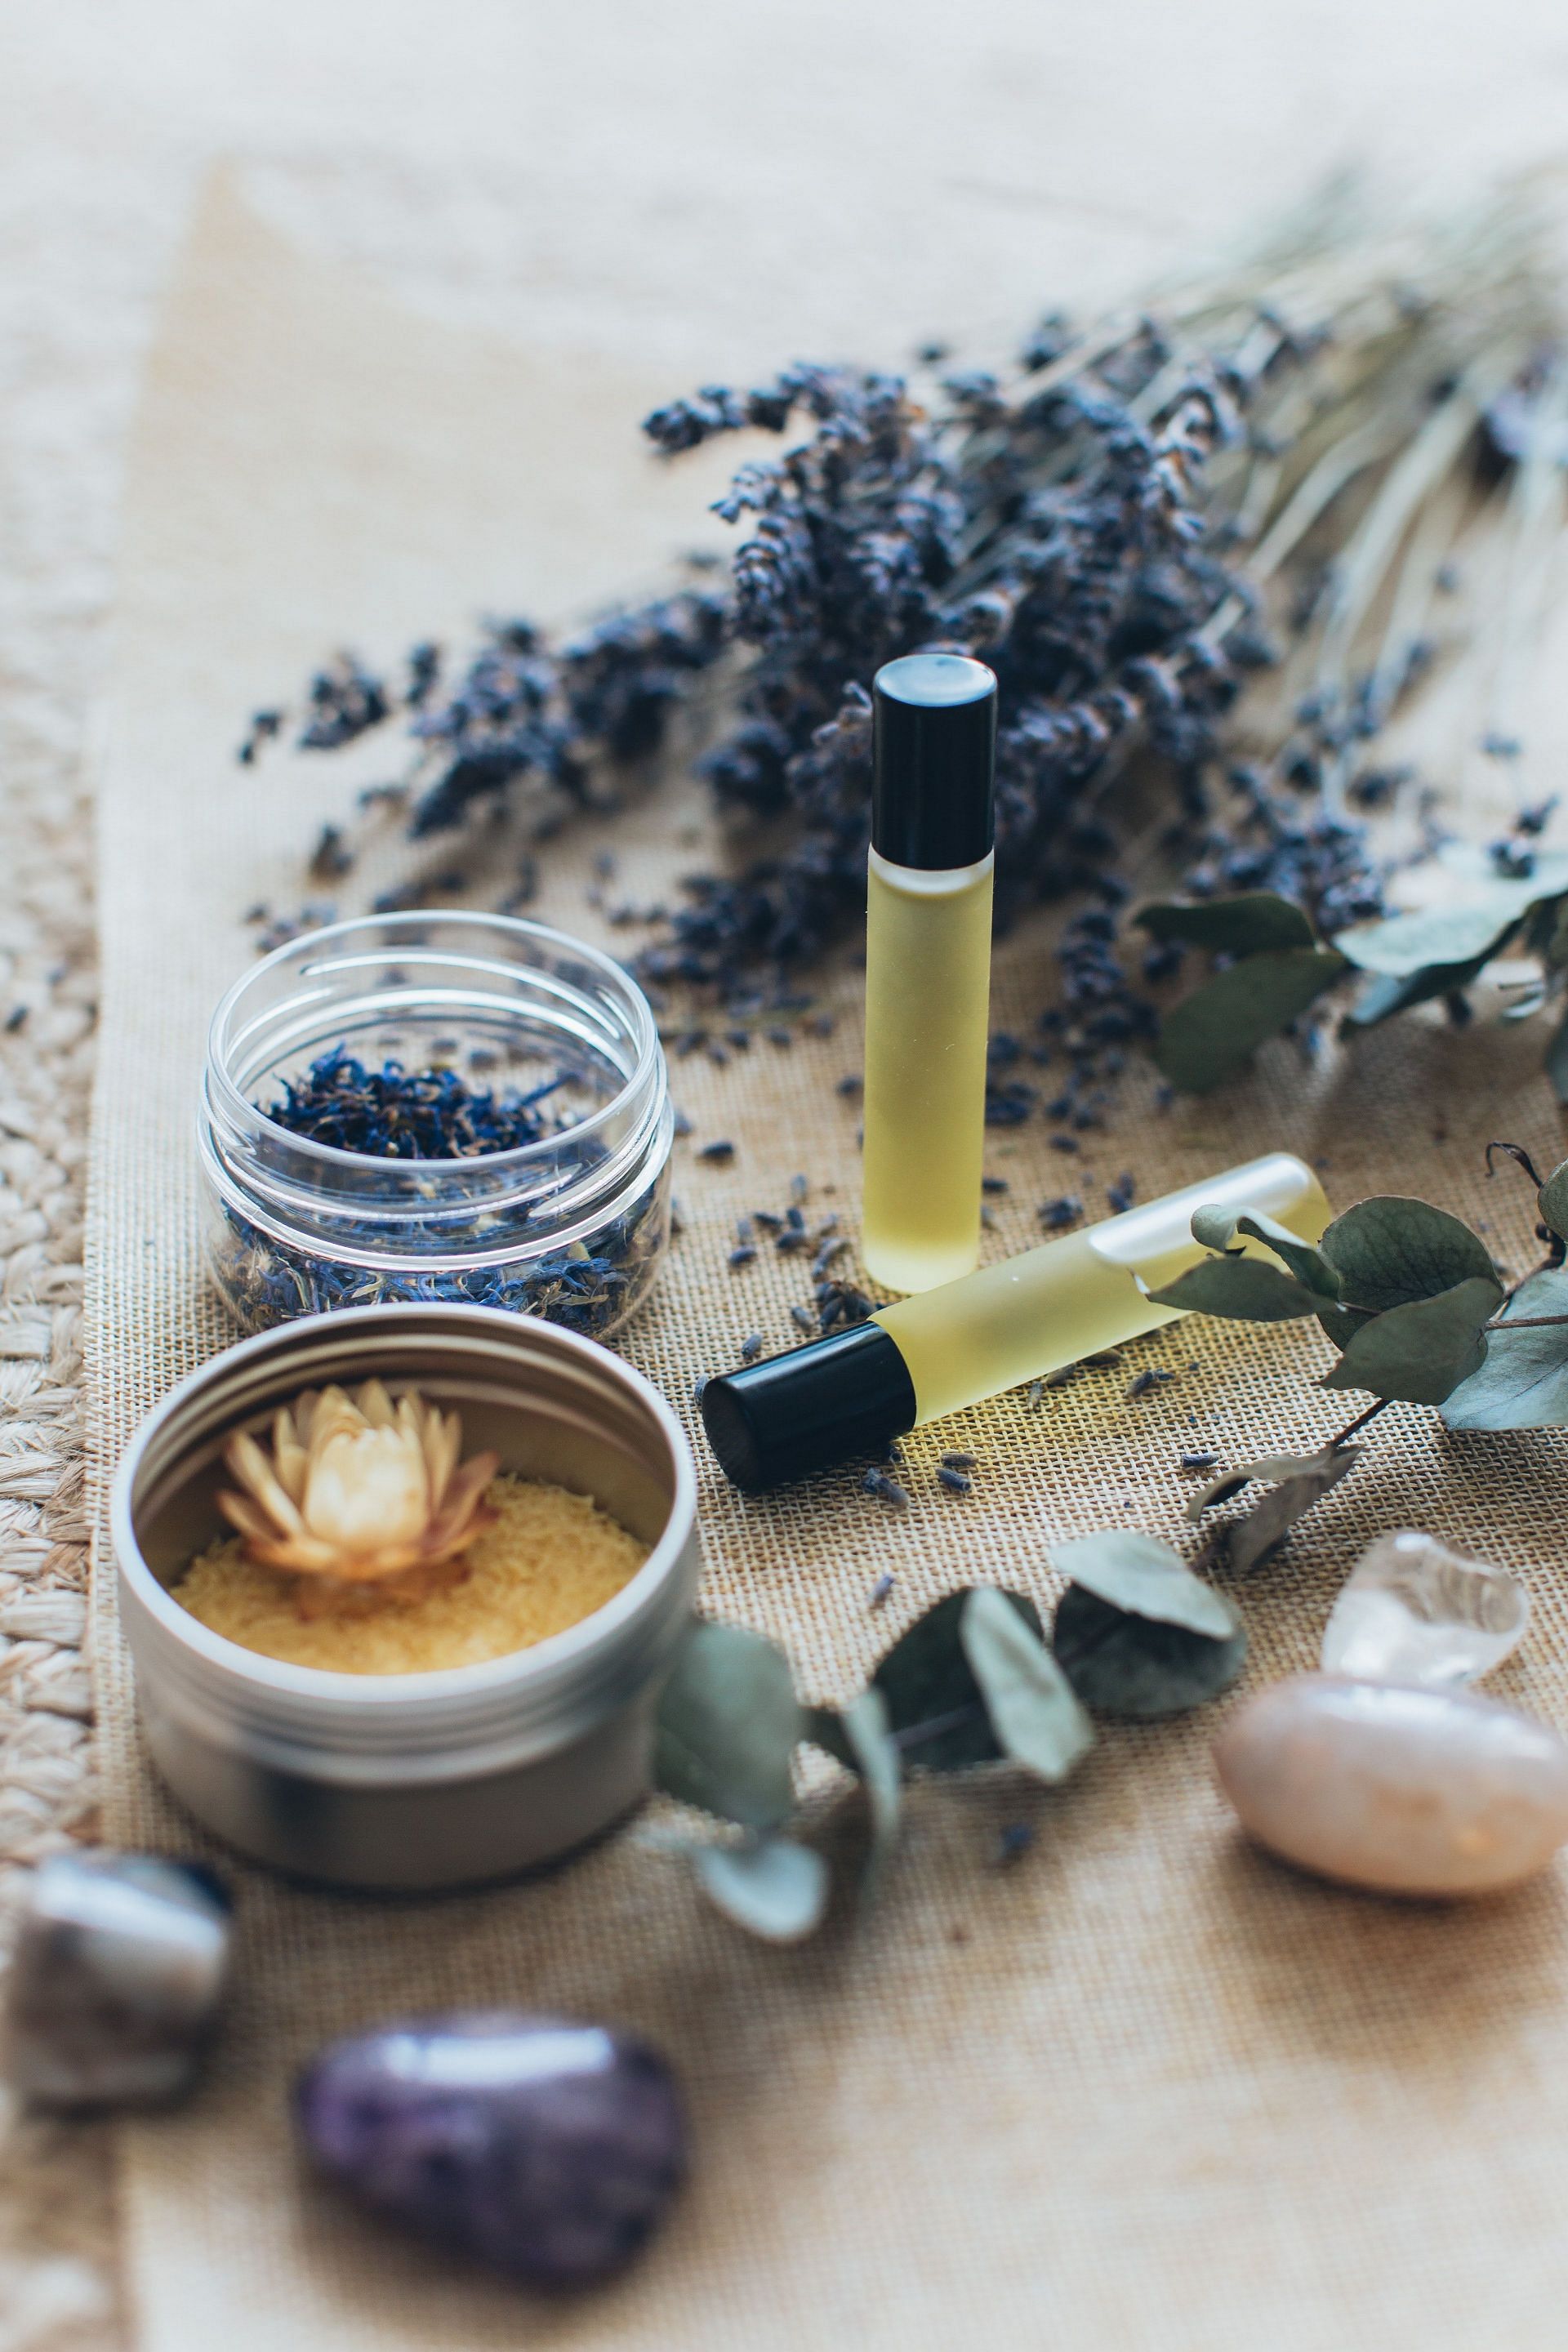 This oil has calming and soothing properties that can help reduce stress and anxiety (Image via Pexels)